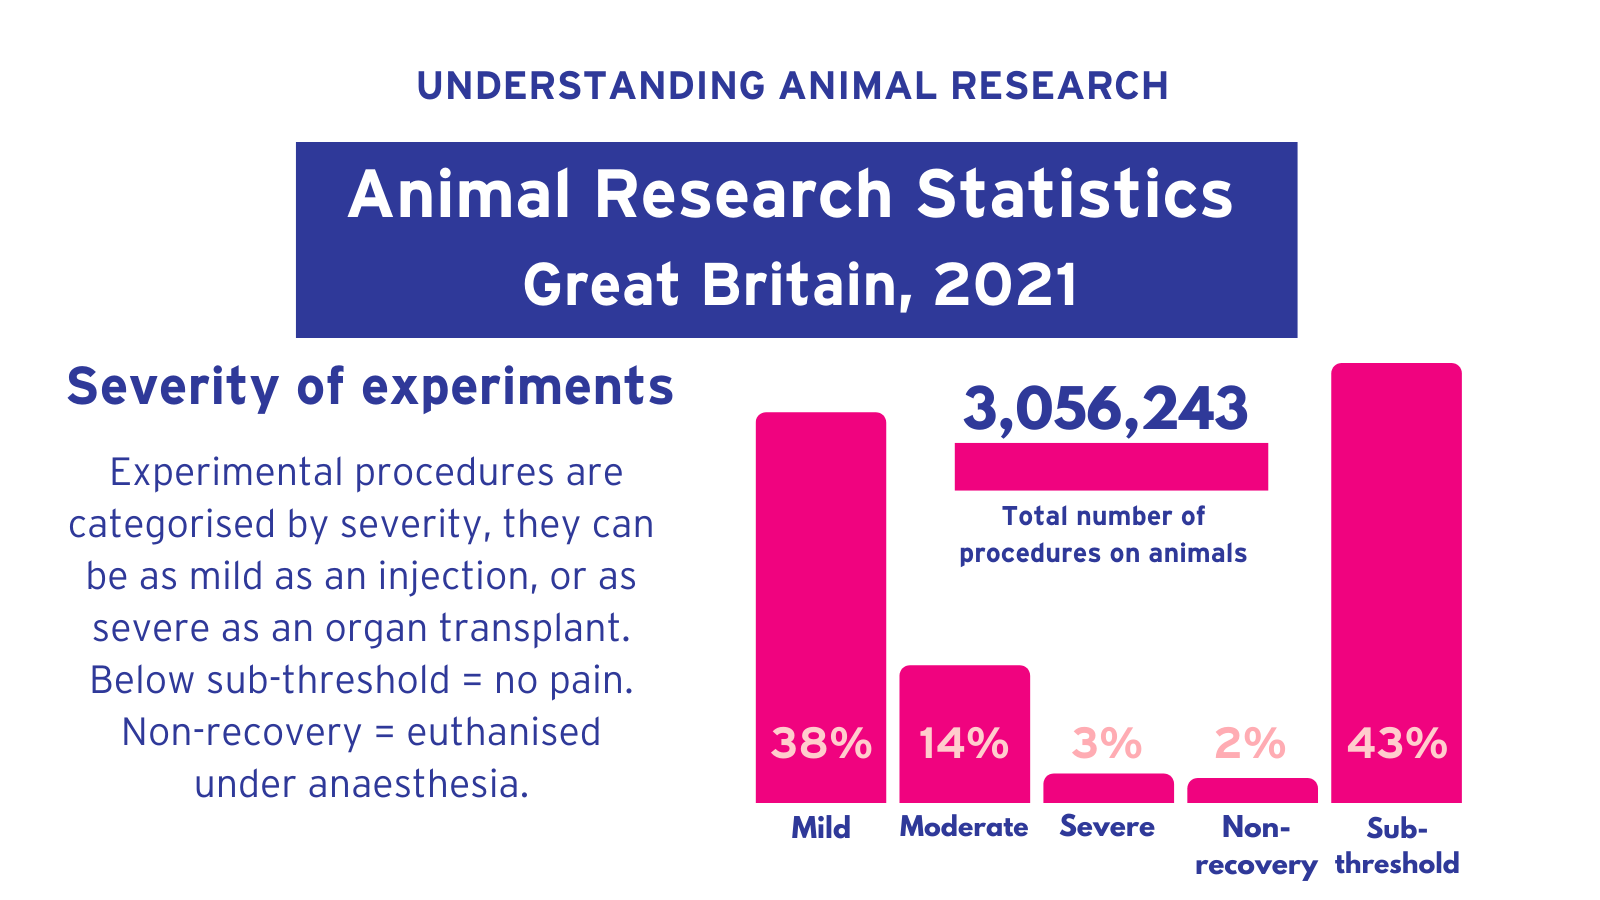 Animal research statistics for Great Britain, 2021 (severity classifications)